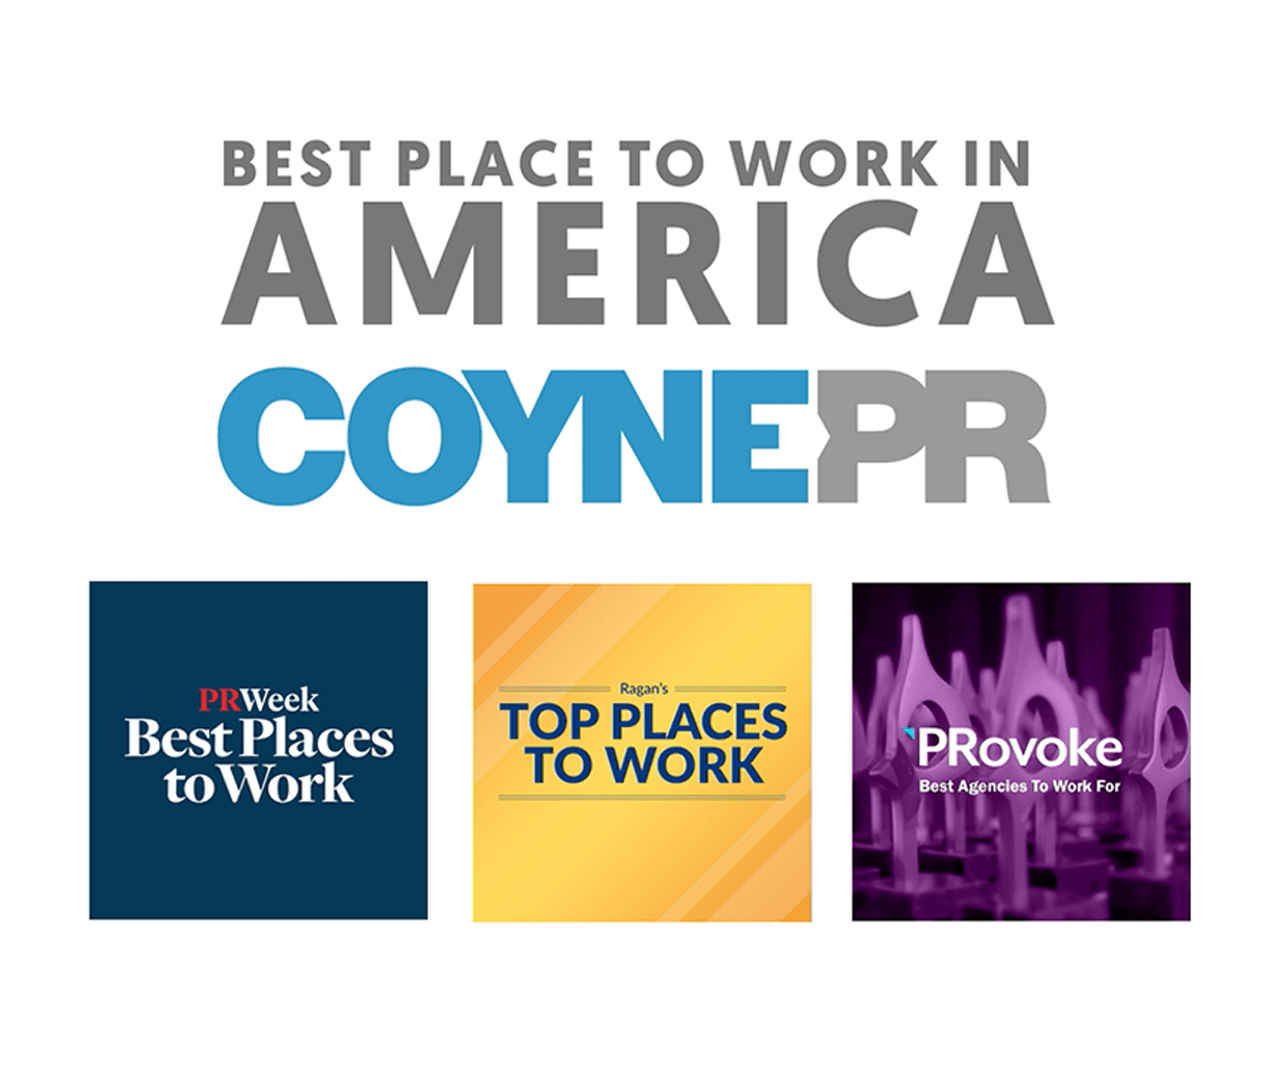 Coyne Public Relations Sweeps Best Place To Work Awards With Recognition From Top Three Industry Authorities